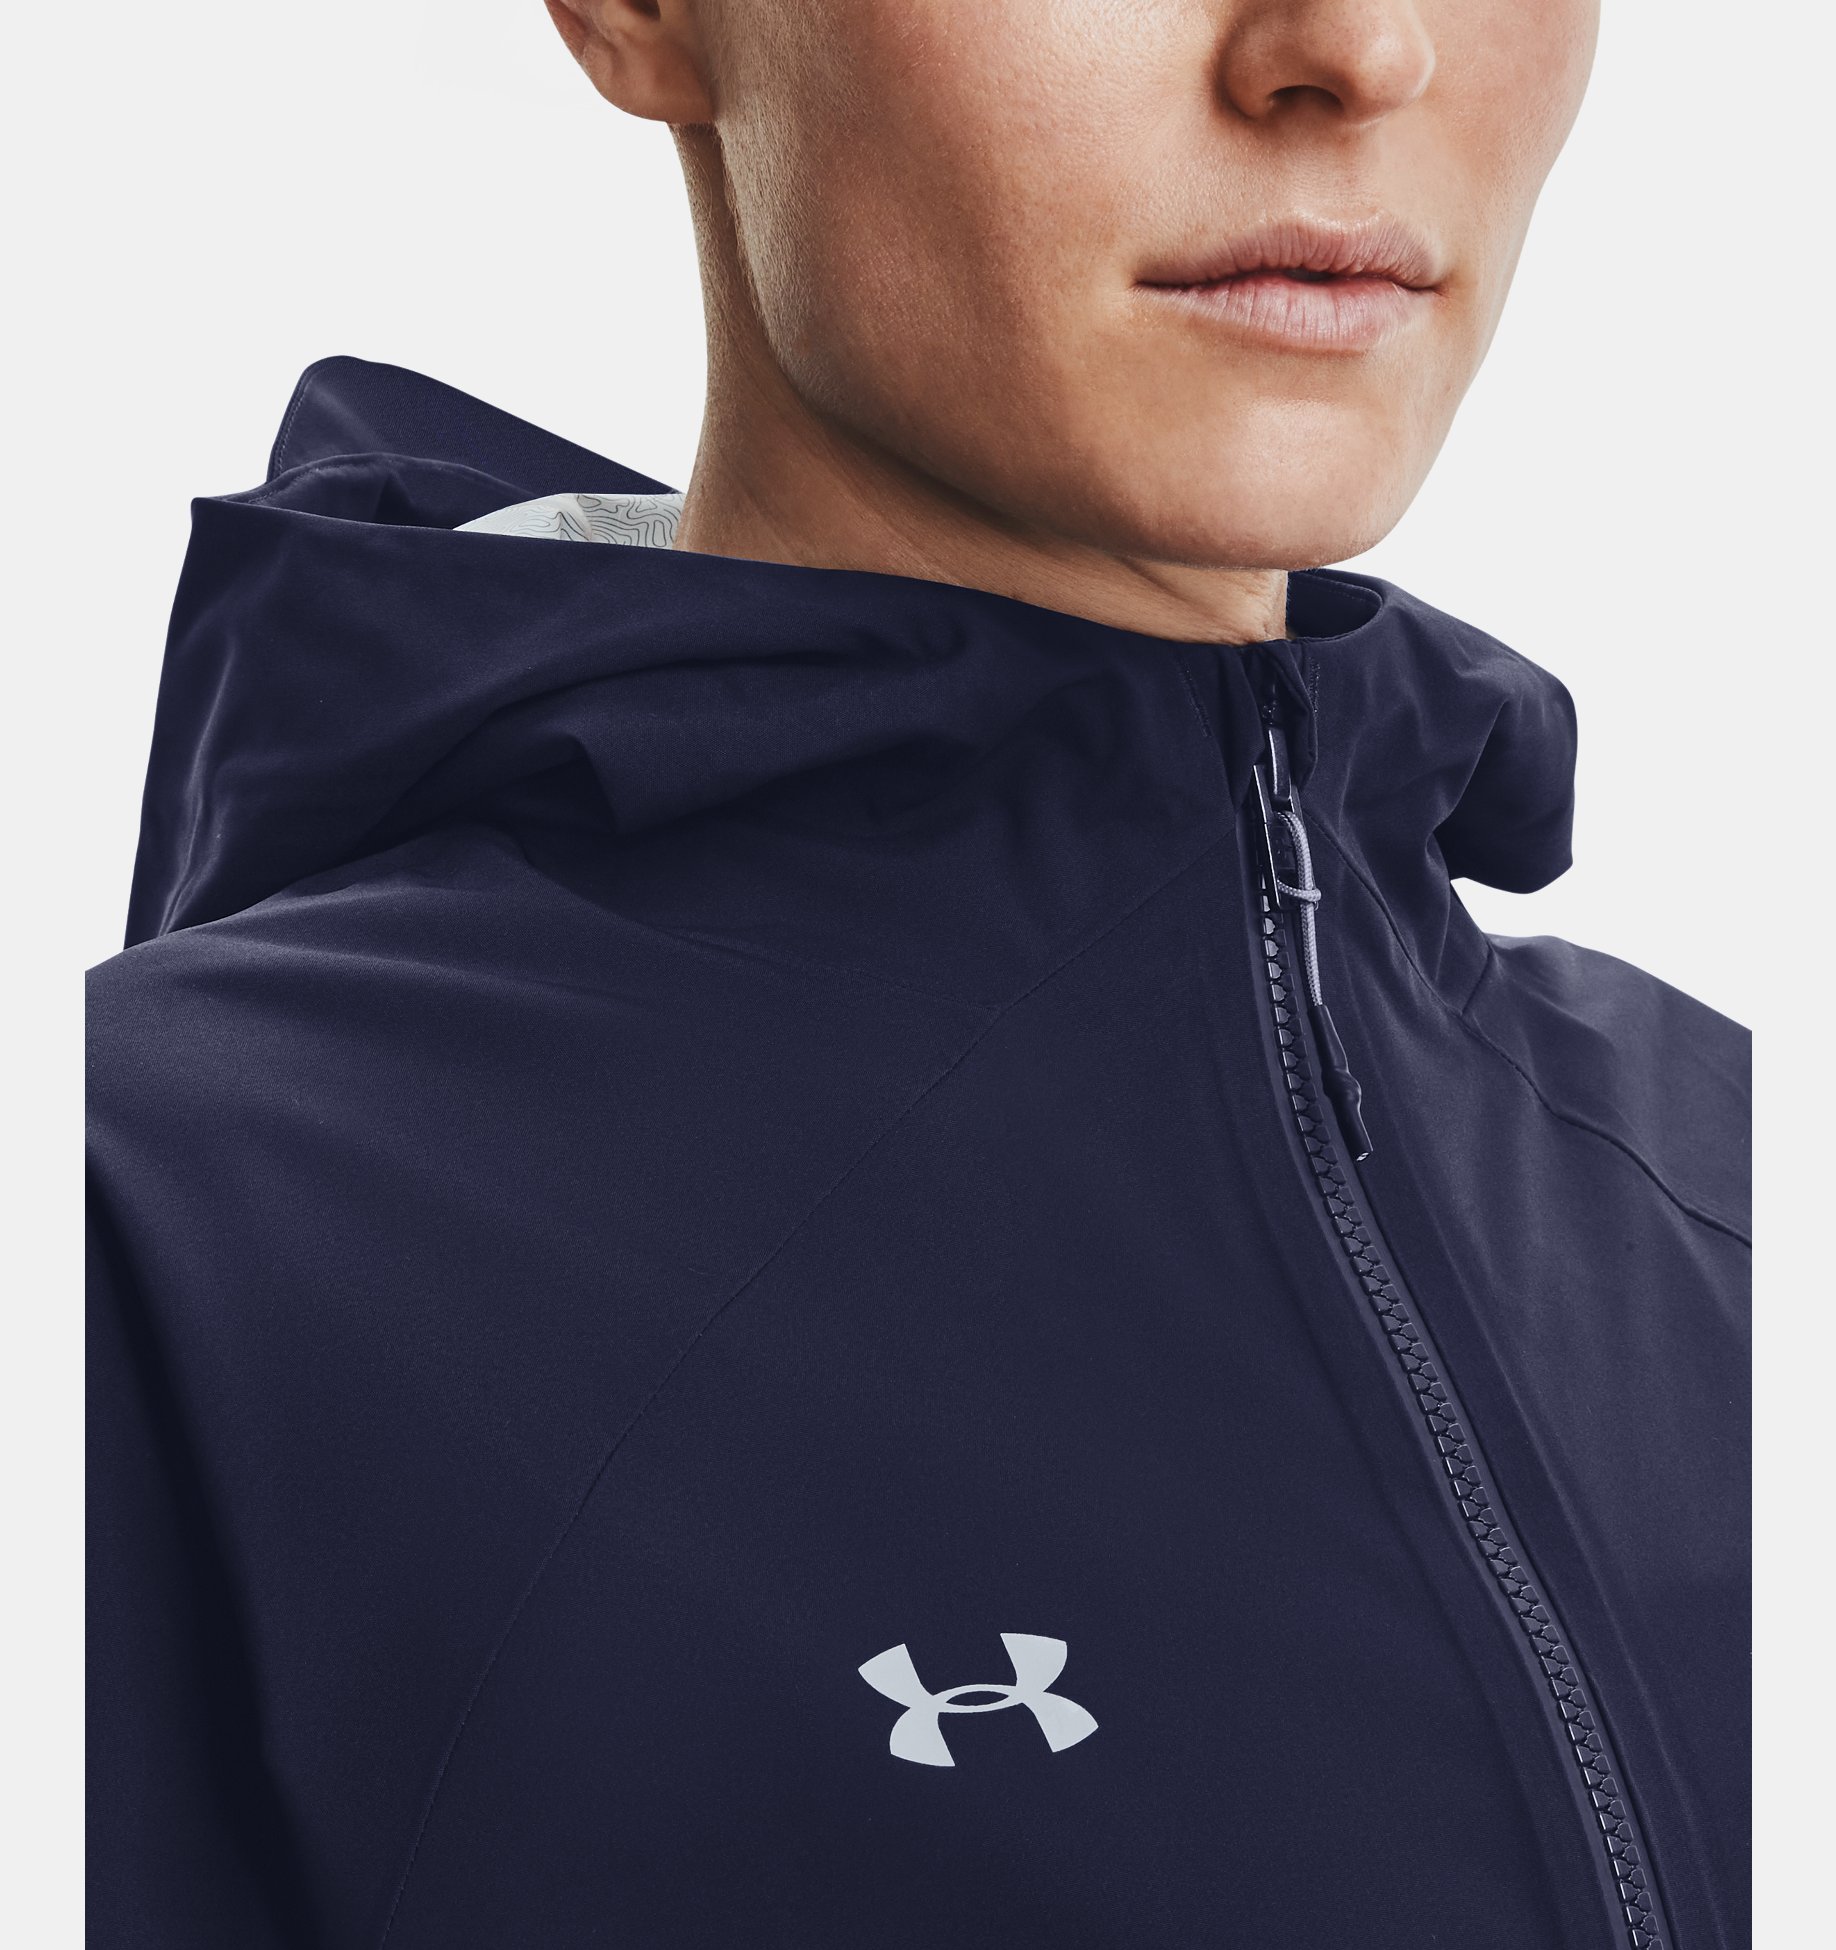 Under Armour Storm Woven Veste Femme Lilla FR M Taille Fabricant : Taille M